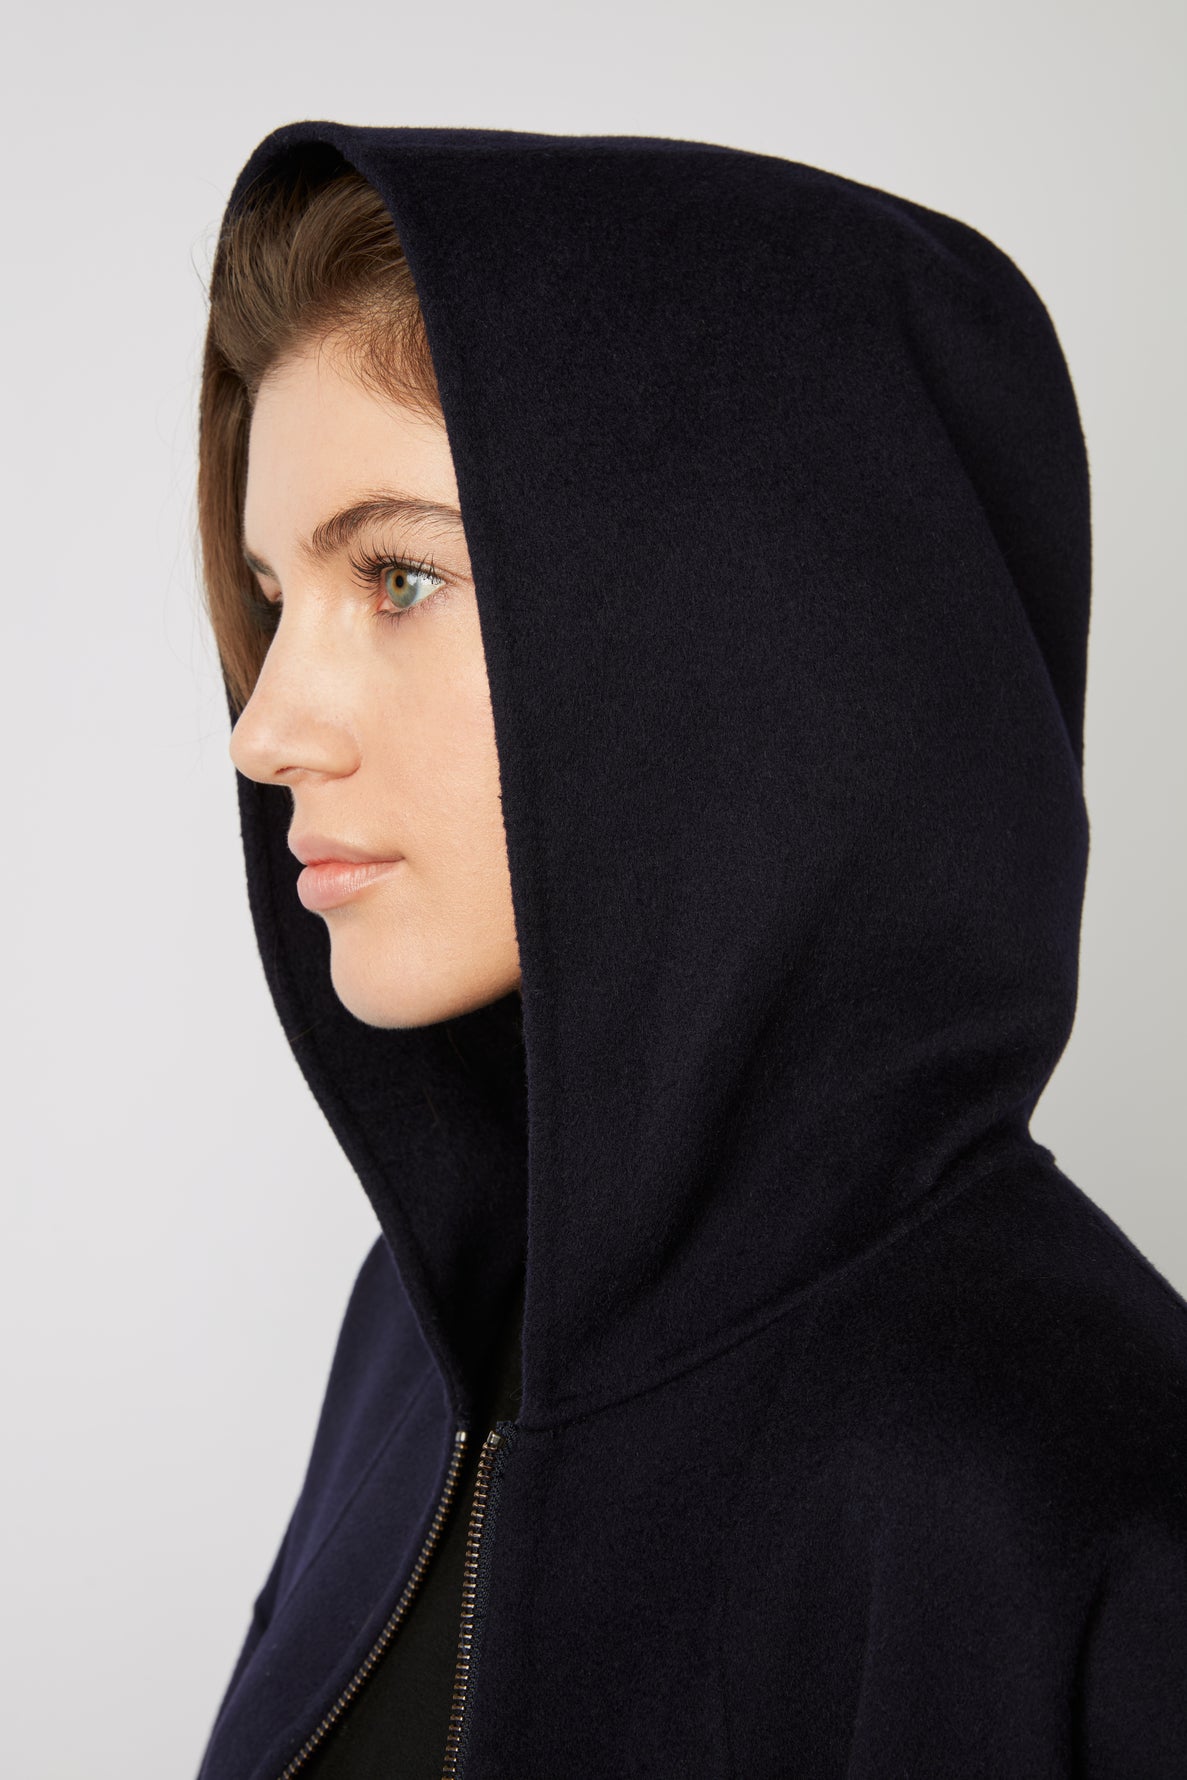 Double Cape Wool Cape Black Cape Cape With Hood Hooded Cape 